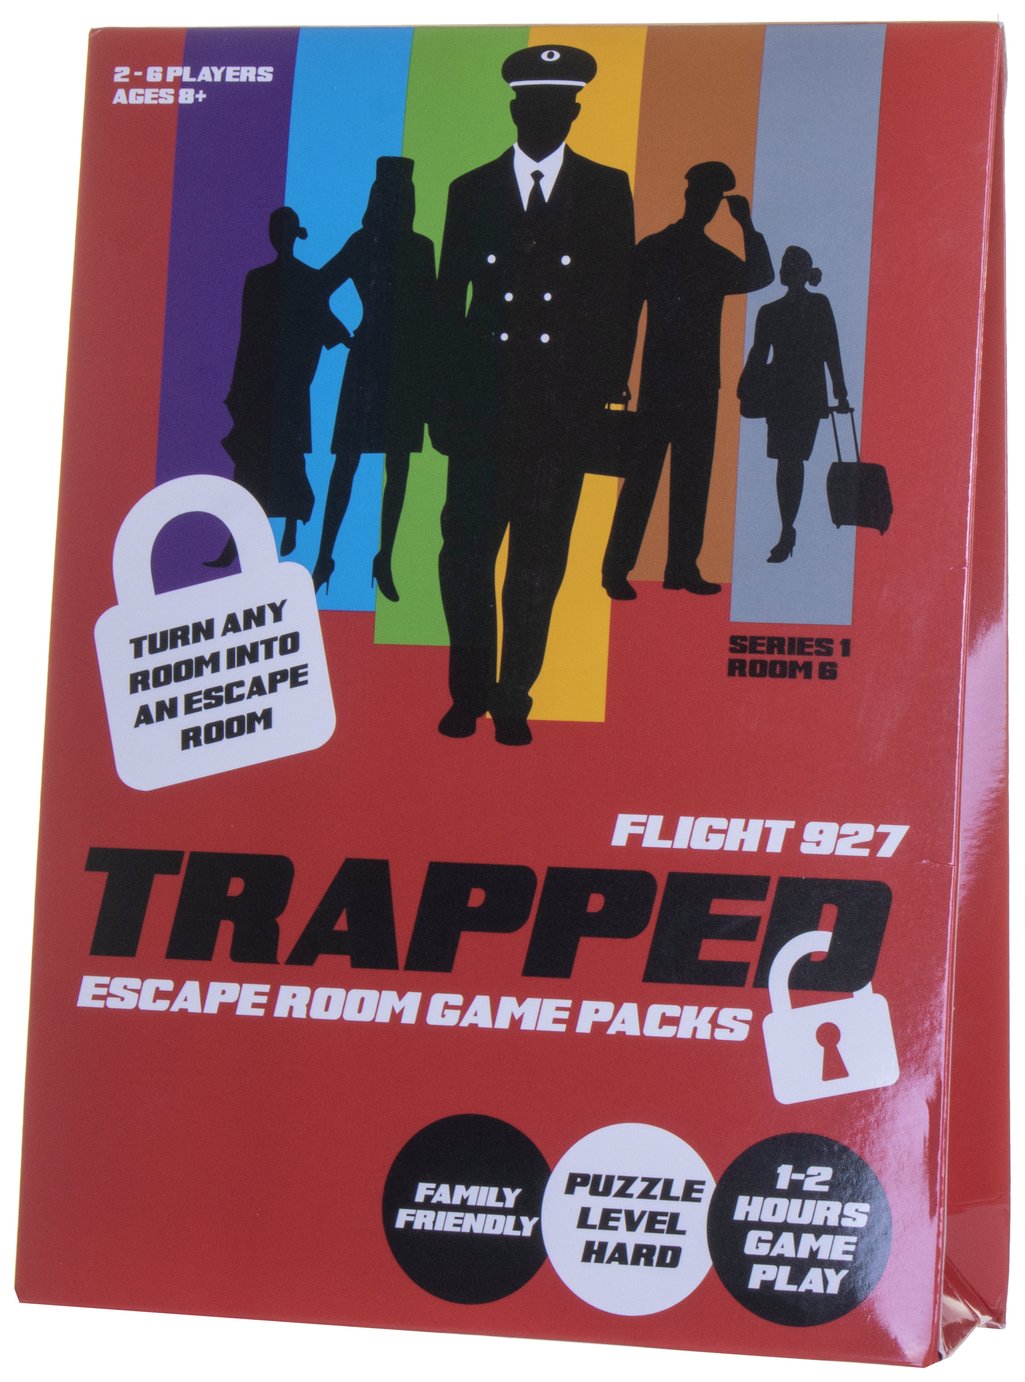 Trapped Escape Room Game Packs Flight 927 review